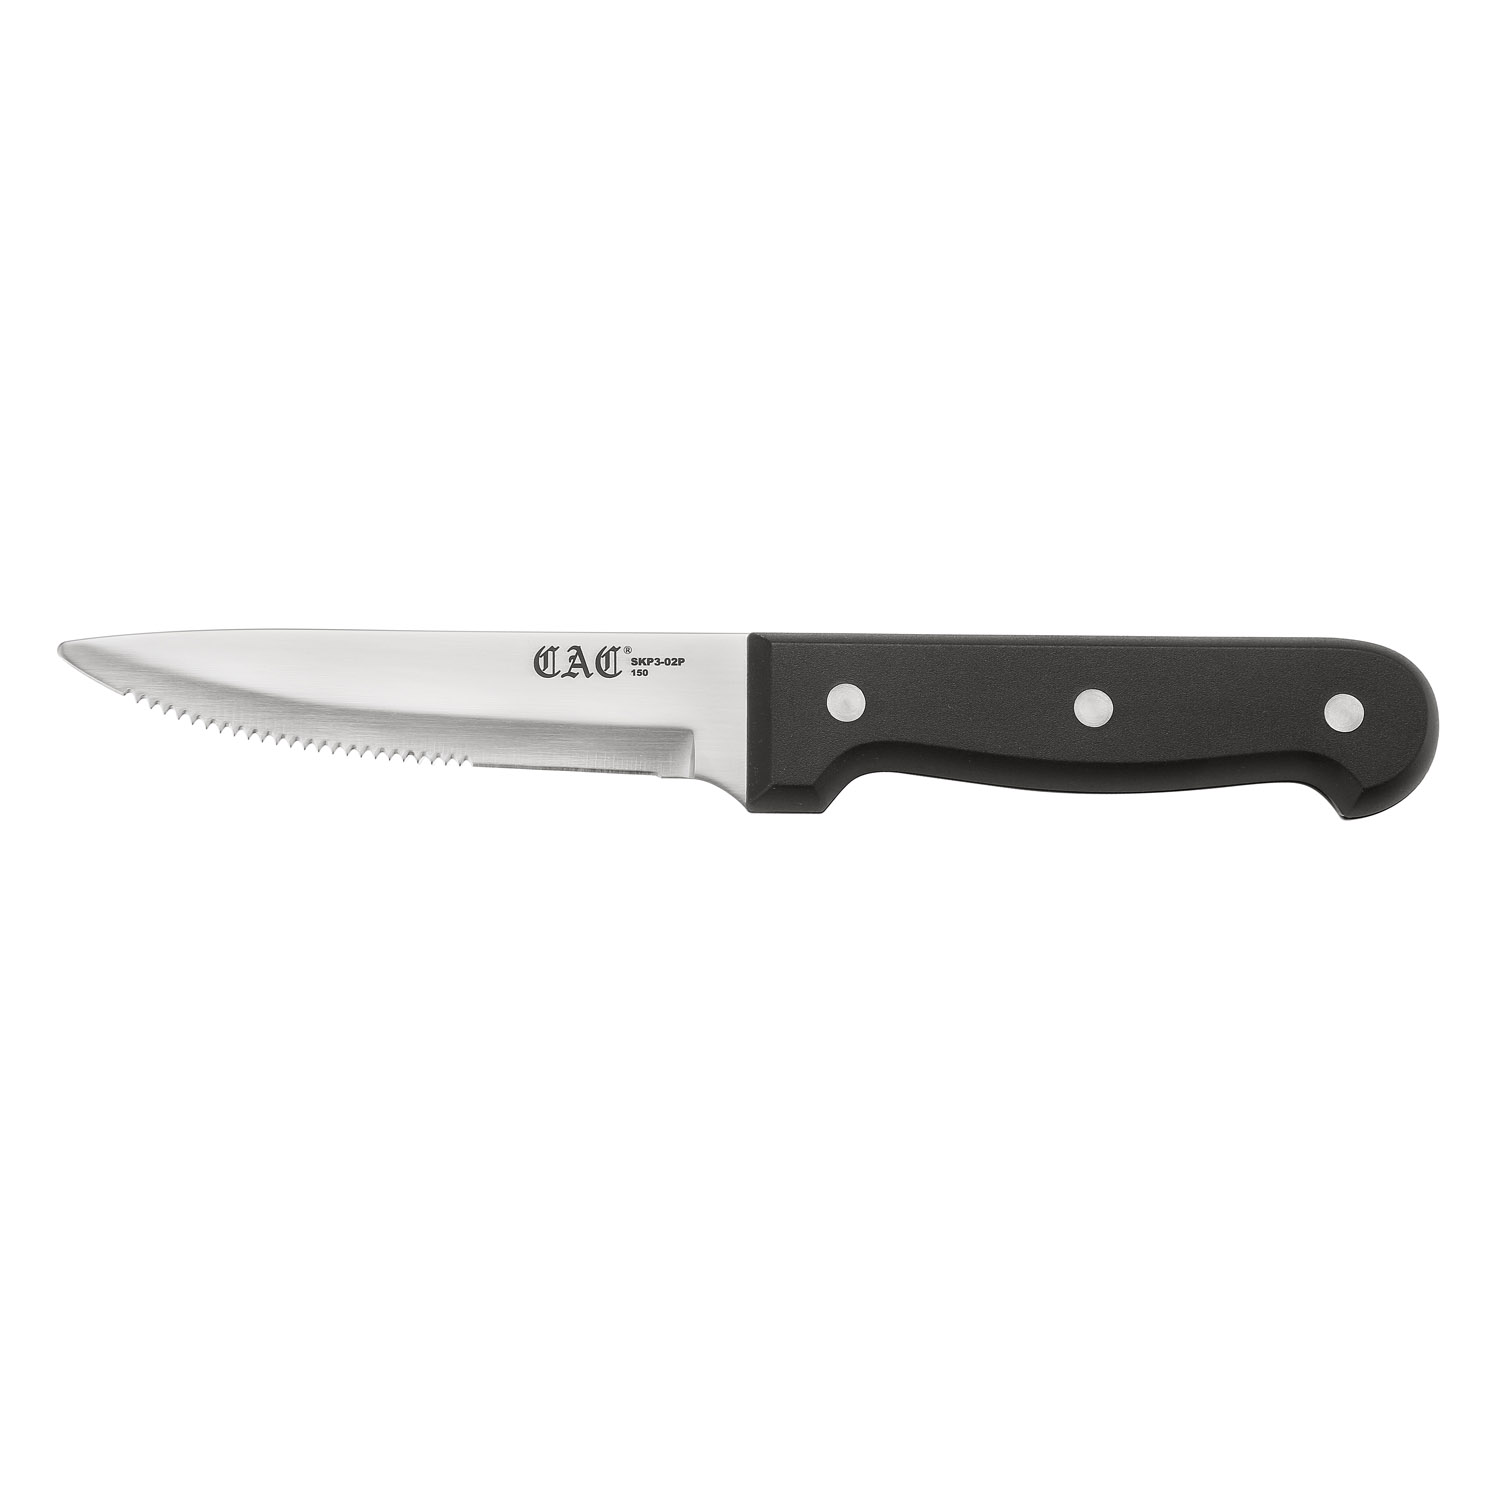 CAC China SKP3-02P Jumbo Steak Knife with Pointed Tip, Plastic Handle 5"